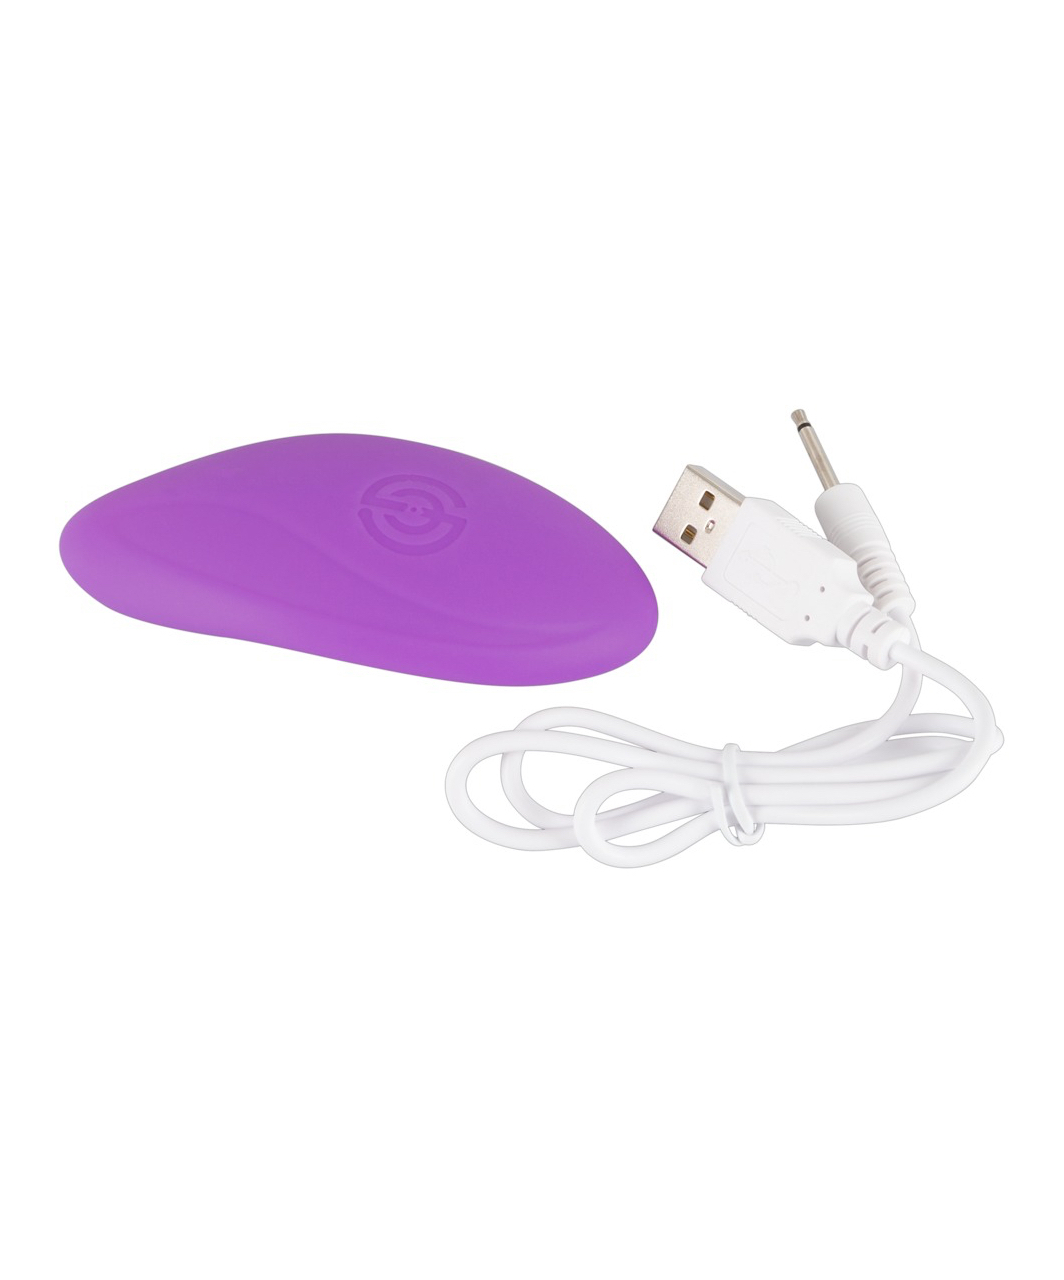 Smile Rechargeable Extra Slim Touch vibraator